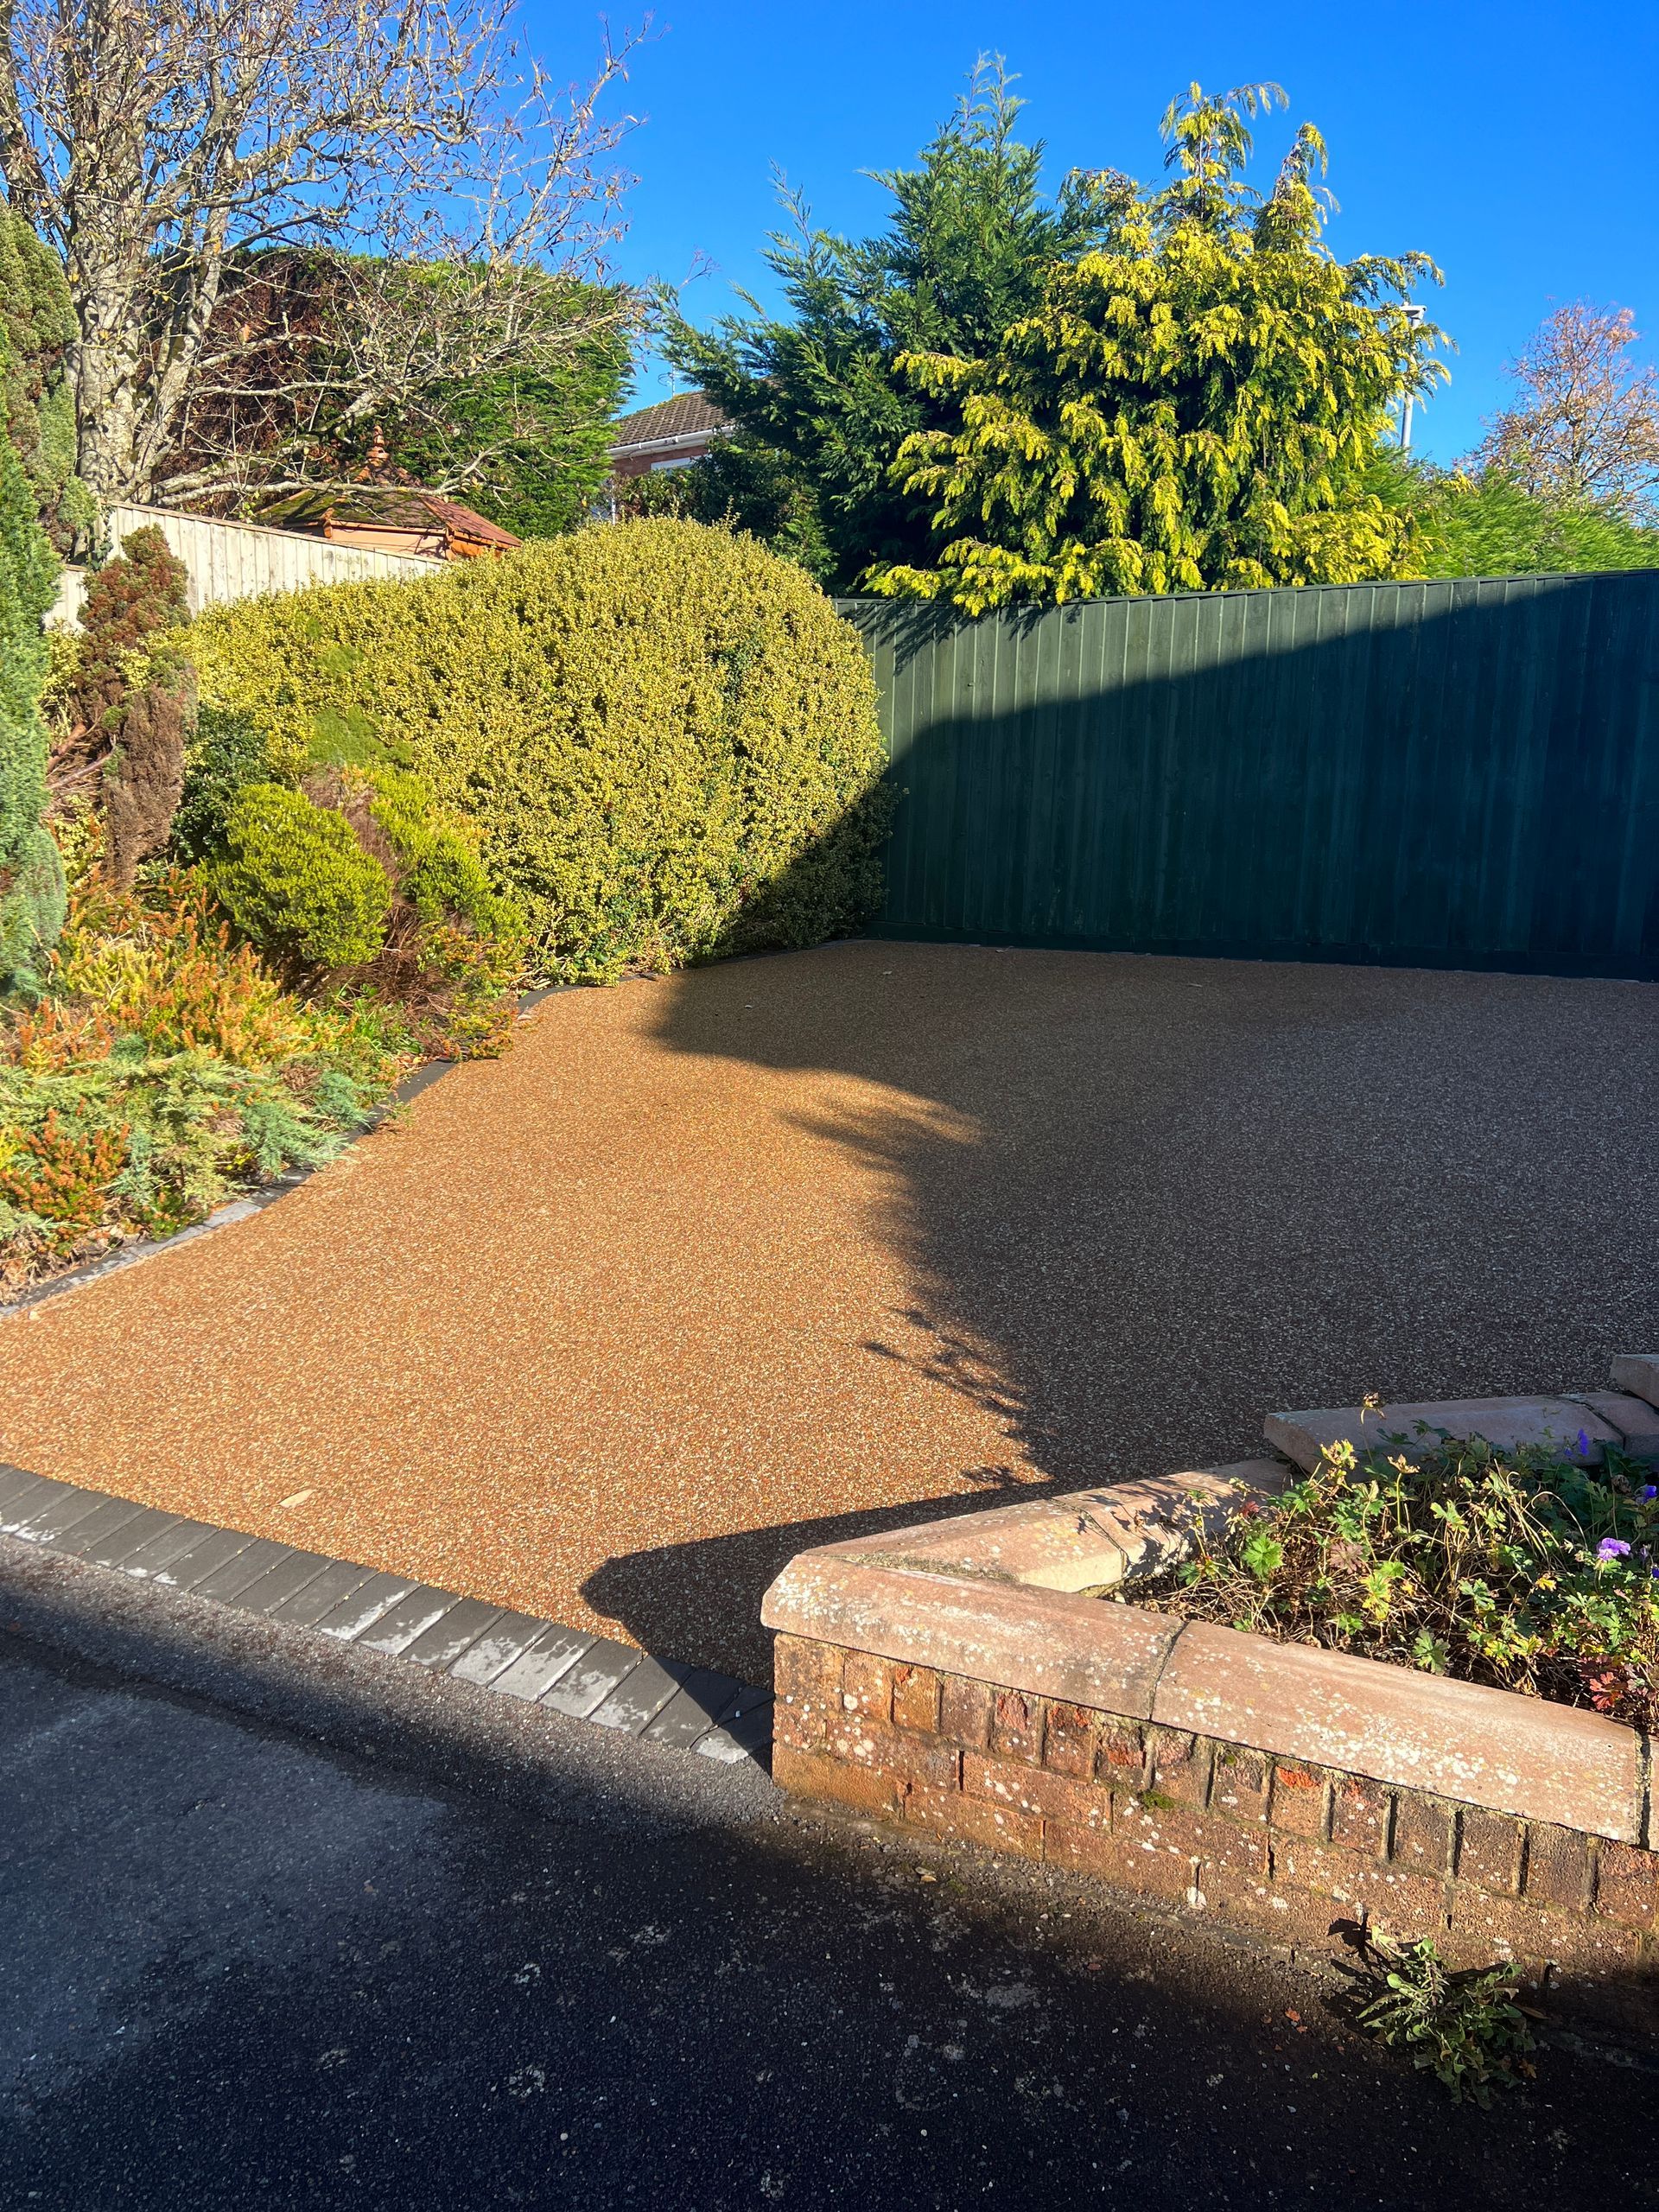 Brown resin driveway surrounded by bushes and trees